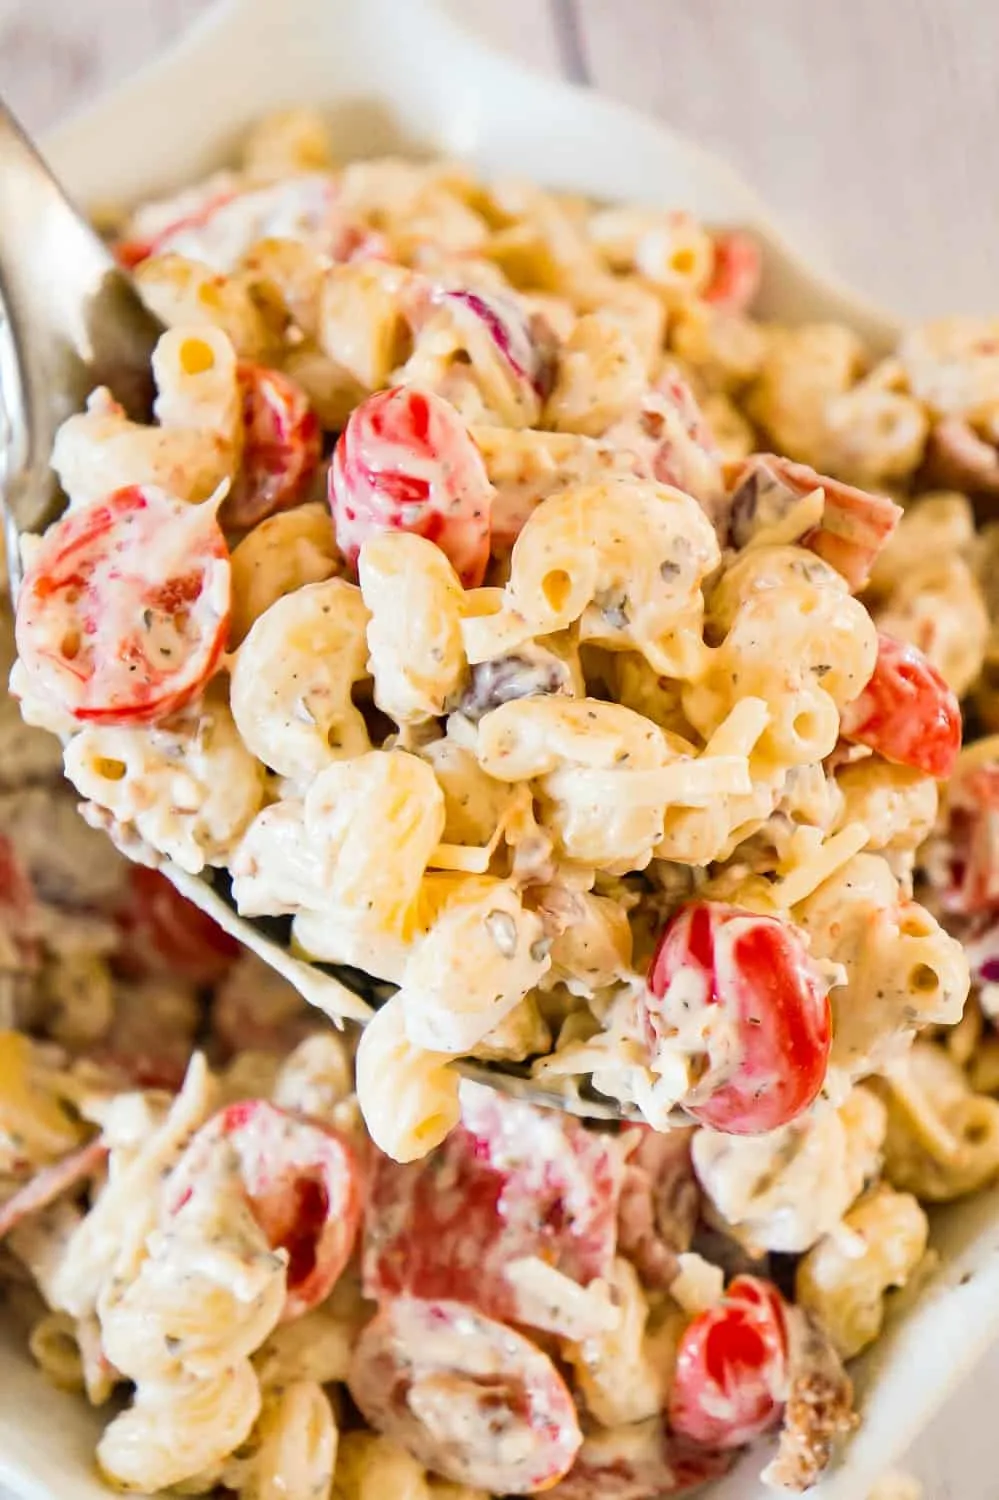 Italian Pasta Salad is a delicious cold side dish recipe perfect for potluck parties. This creamy pasta salad is loaded with cherry tomatoes, red onions, salami, bacon, basil pesto, Parmesan cheese and mozzarella cheese.